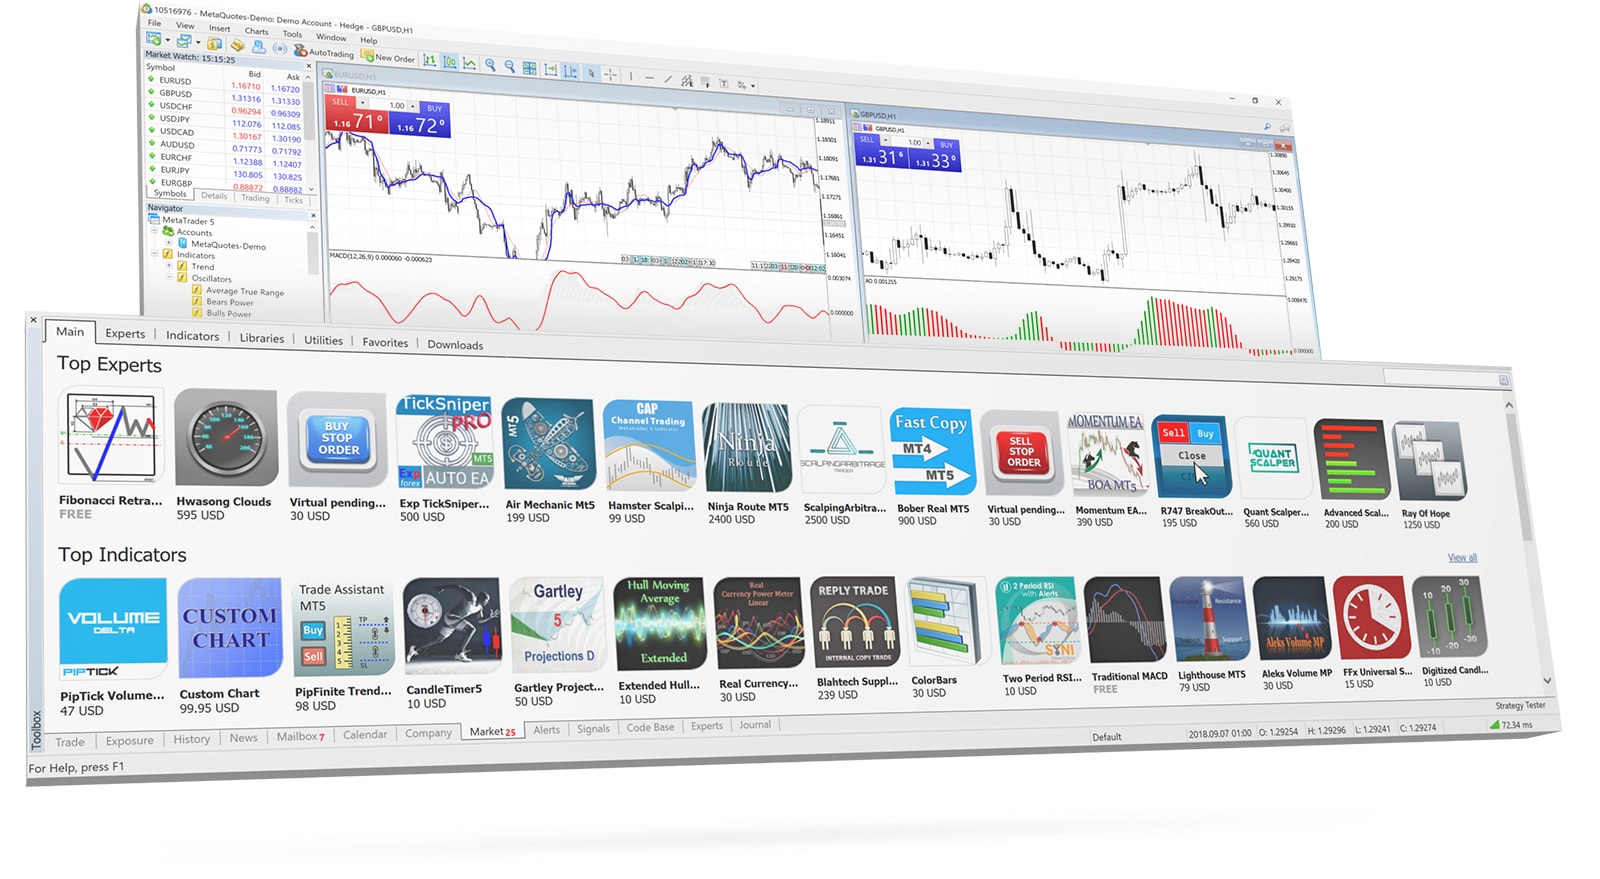 4,800 robots, 6,500 indicators, 2,400 utilities and other solutions in the MetaTrader Market